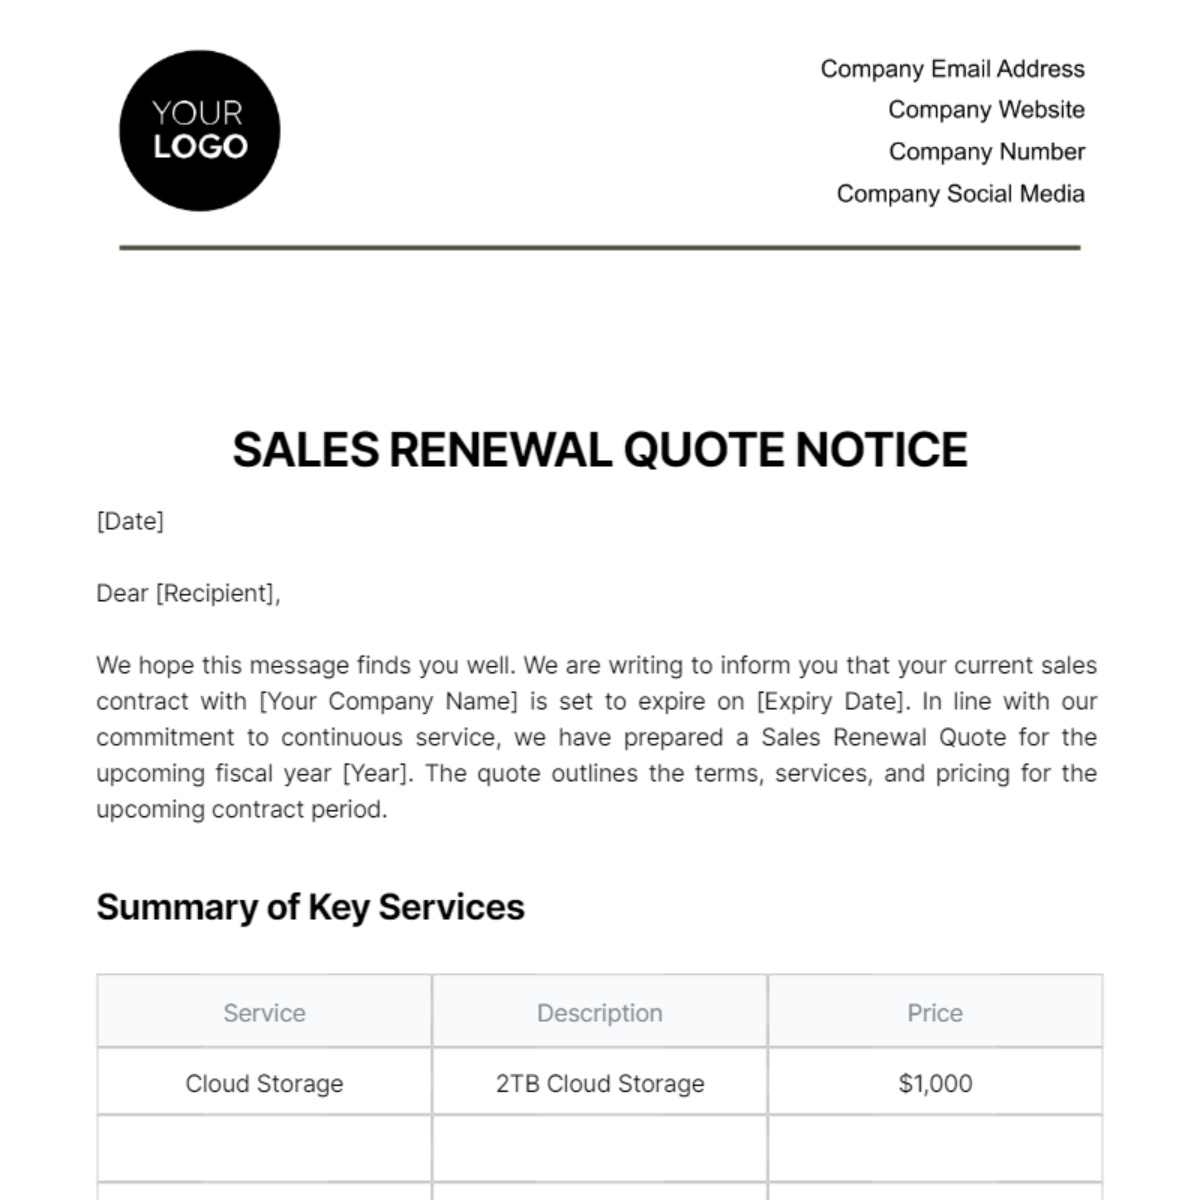 Free Sales Renewal Quote Notice Template